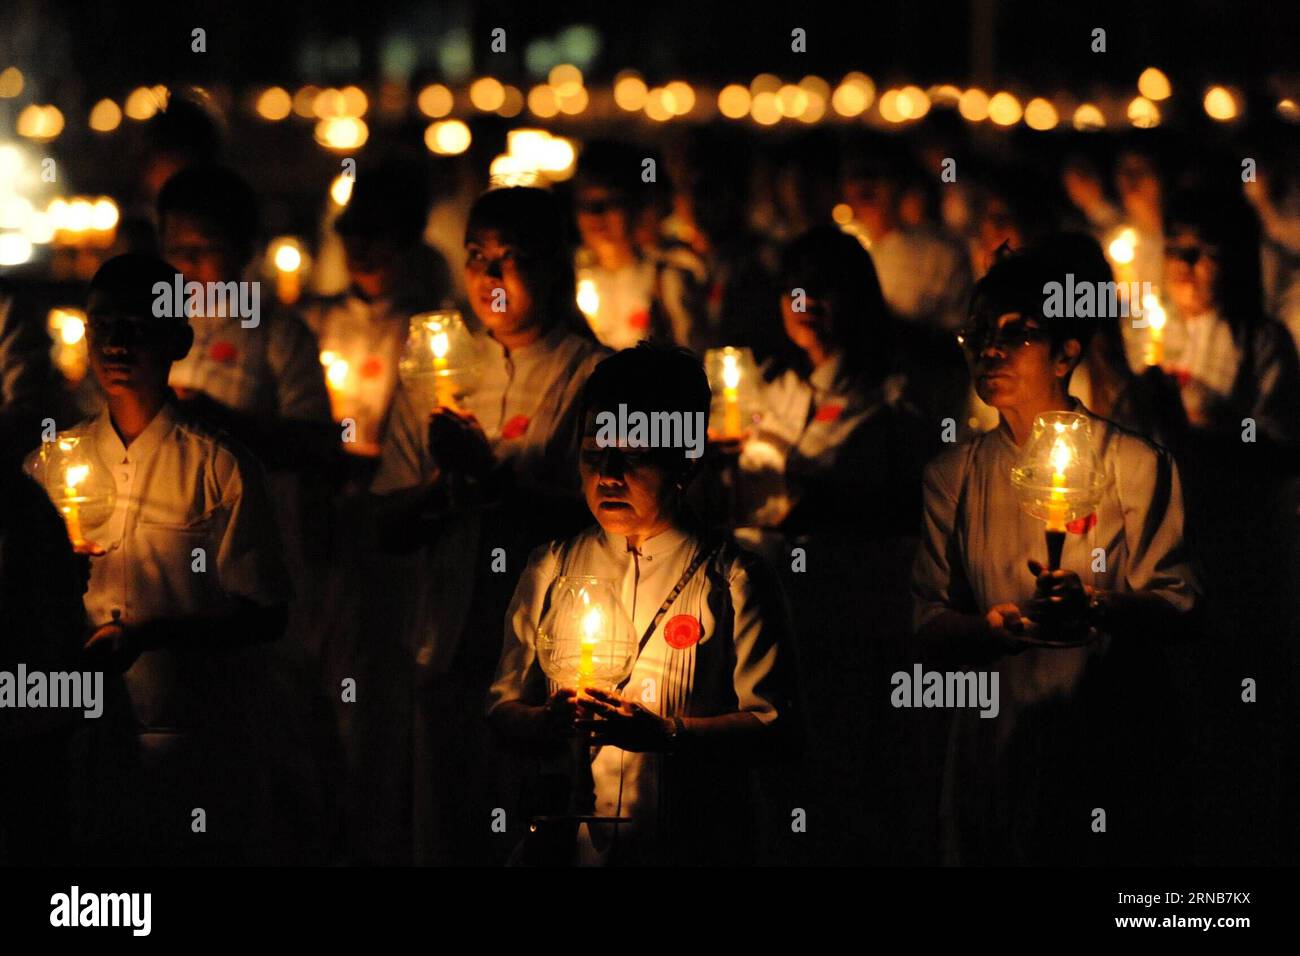 Thai people light candles and pray during Makha Bucha Day ceremonies at Wat Phra Dhammakaya Temple in Pathum Thani Province, Thailand, on Feb. 22, 2016. As one of Thailand s most important Buddhist festivals, Makha Bucha is observed every full moon night of the third month in the Thai lunar calendar. On the Makha Bucha day, people flock to temples and venerate Buddhas as well as pray for blessedness. ) THAILAND-PATHUM THANI-MAKHA BUCHA DAY RachenxSageamsak PUBLICATIONxNOTxINxCHN   Thai Celebrities Light Candles and Pray during Makha Bucha Day Ceremonies AT Wat Phra Dhammakaya Temple in Pathum Stock Photo